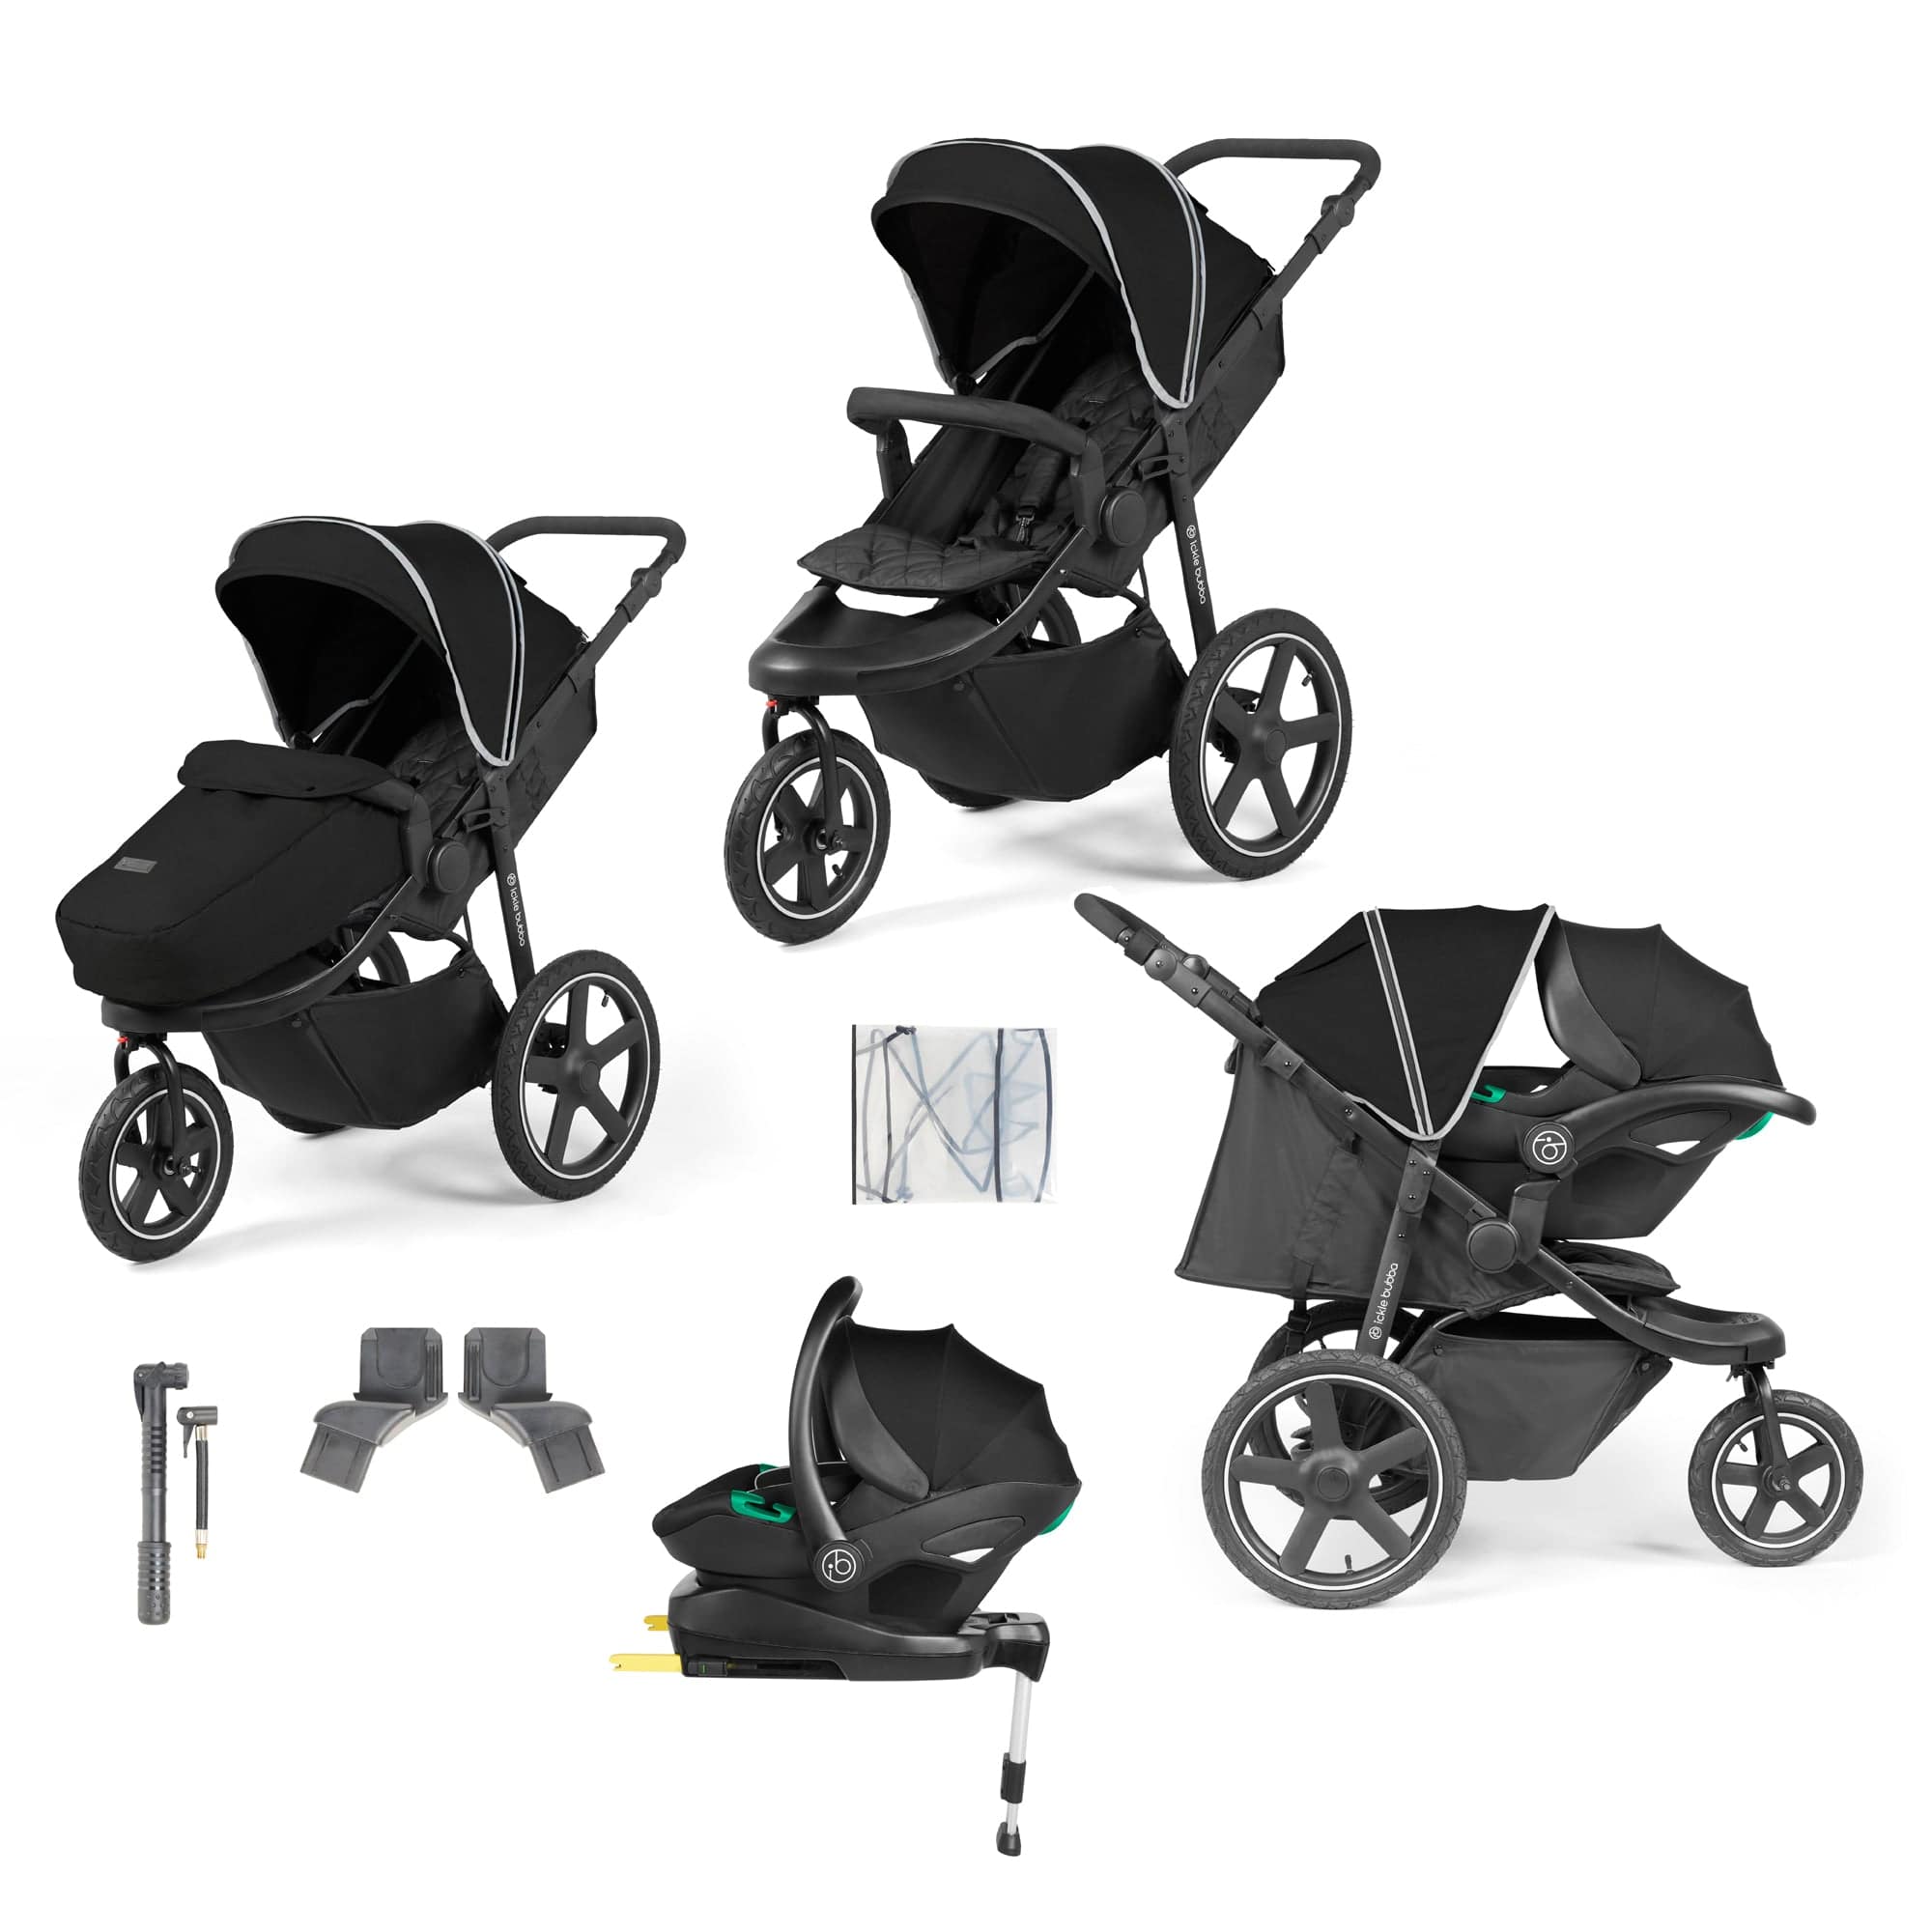 Ickle Bubba 3 wheel pushchairs Ickle Bubba Venus Max Jogger Stroller I-Size Travel System - Black/Black with Isofix Base 13-004-500-001